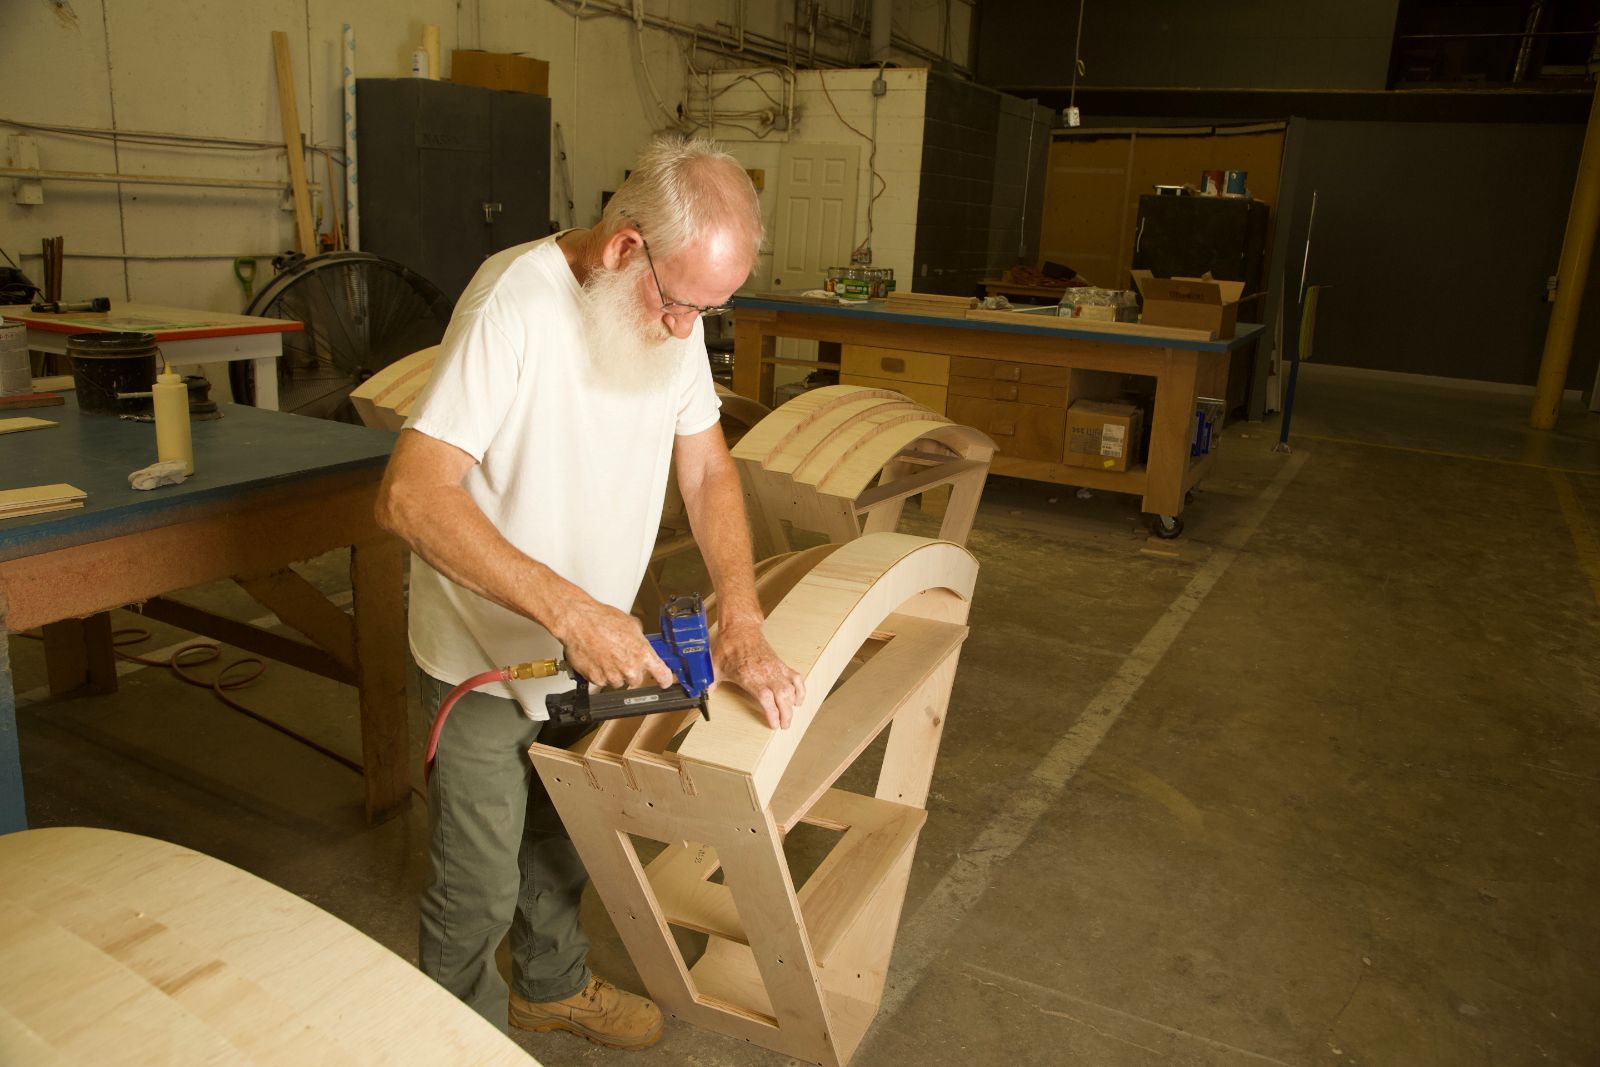 Importance Of Accuracy In Carpentry and Woodworking - Showcase